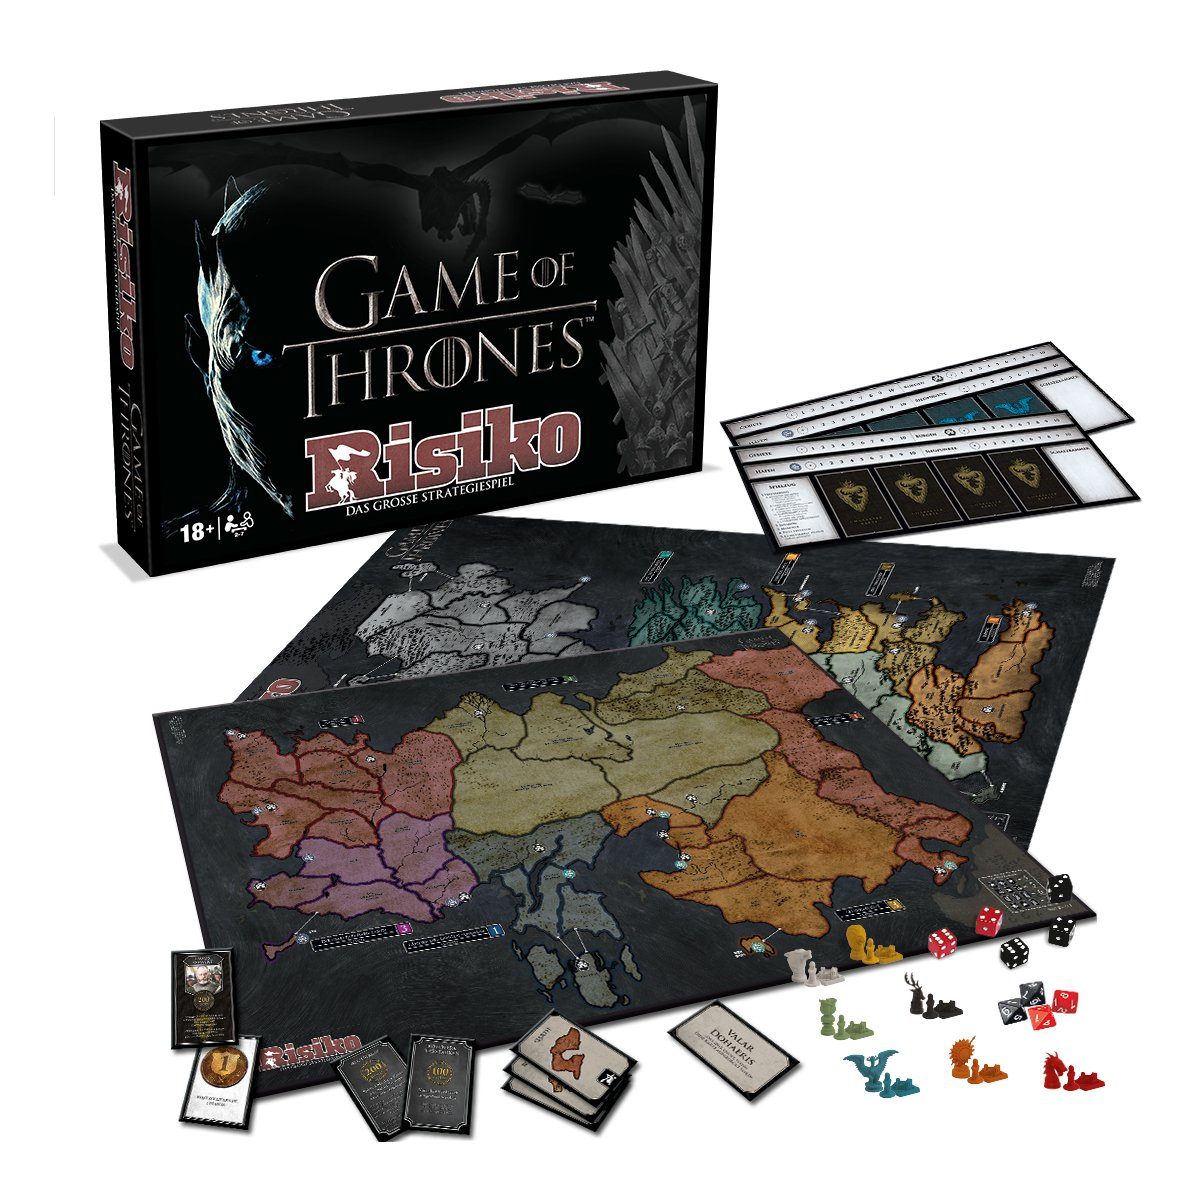 (Collectors Edition) Moves Winning Brettspiel - Spiel, Thrones Risiko of Game